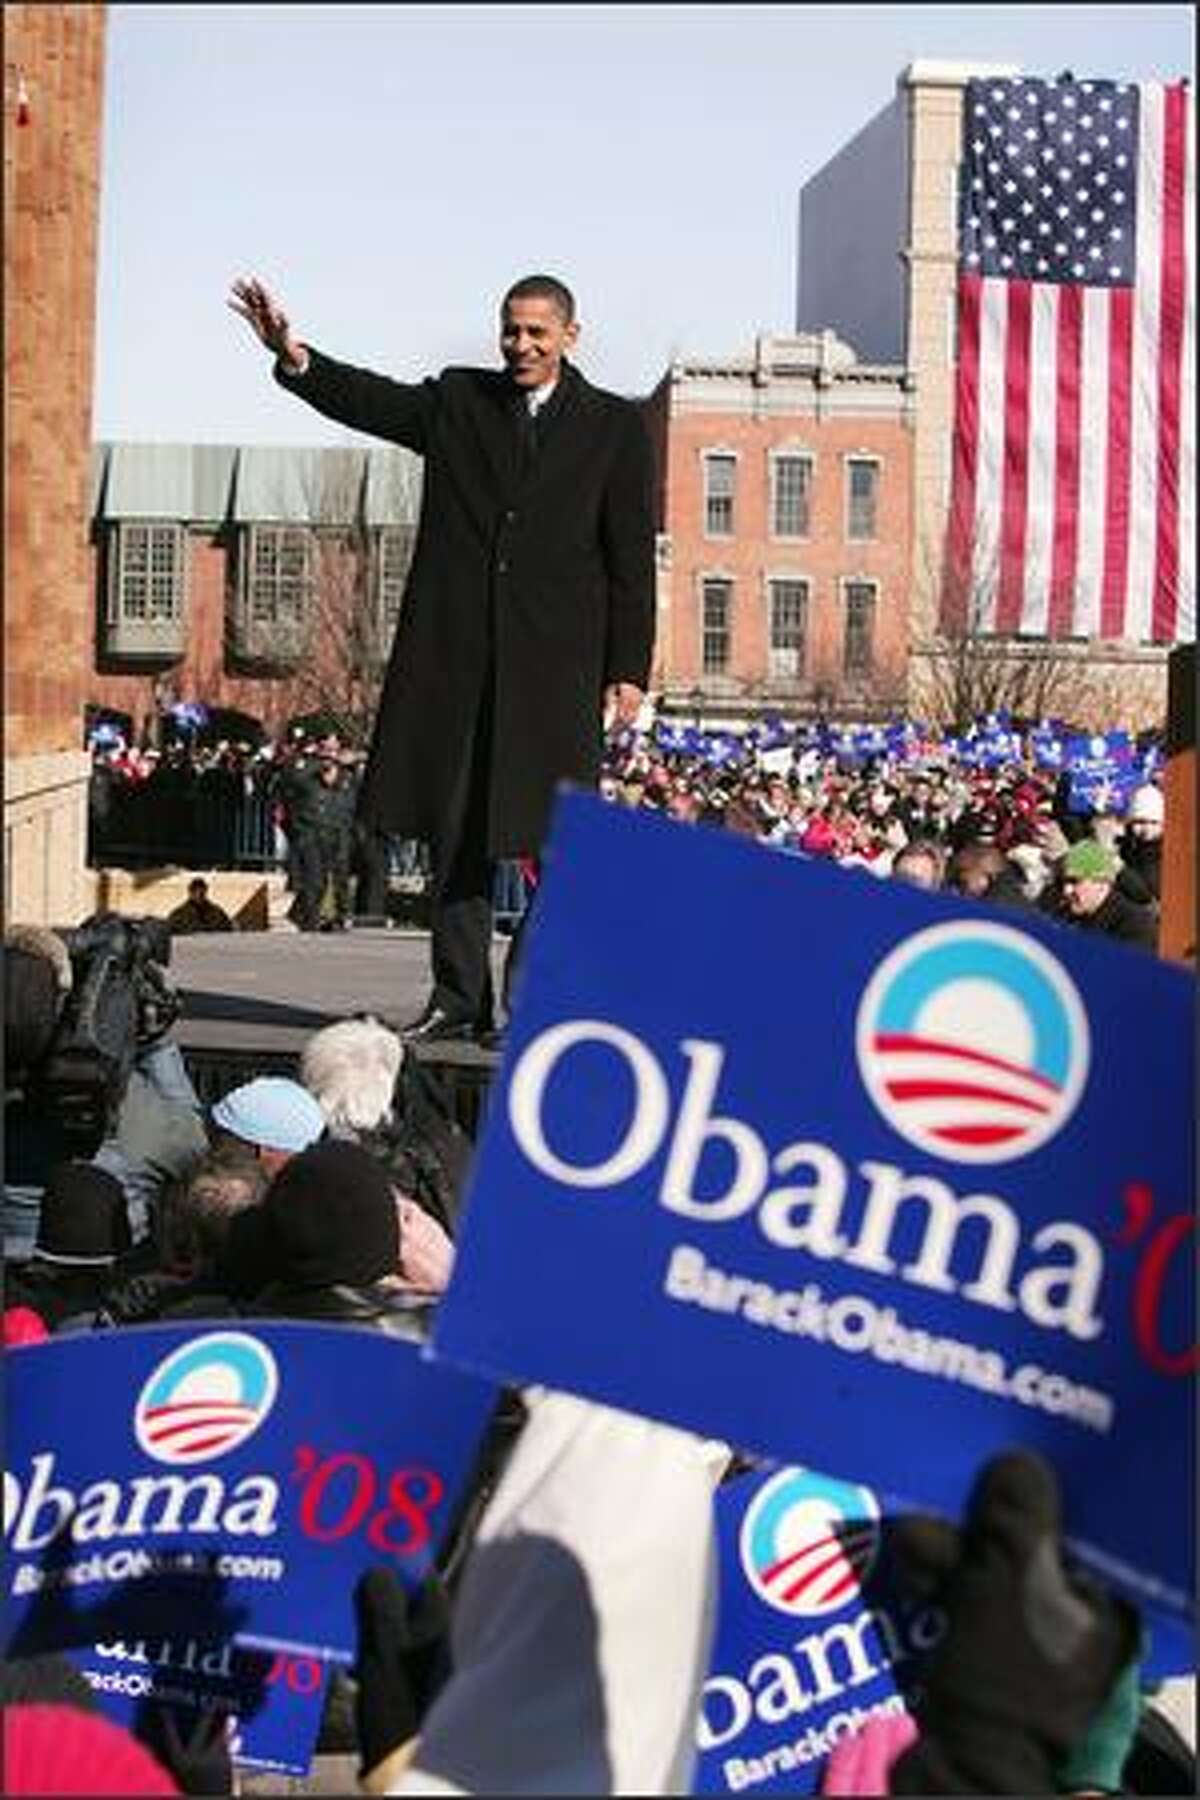 Senator Barack Obama (D-IL) waves to a crowd gathered on the lawn of the old State Capital Building Feb. 10, 2007 in Springfield, Illinois. Obama announced to the crowd that he would seek the Democratic nomination for President.